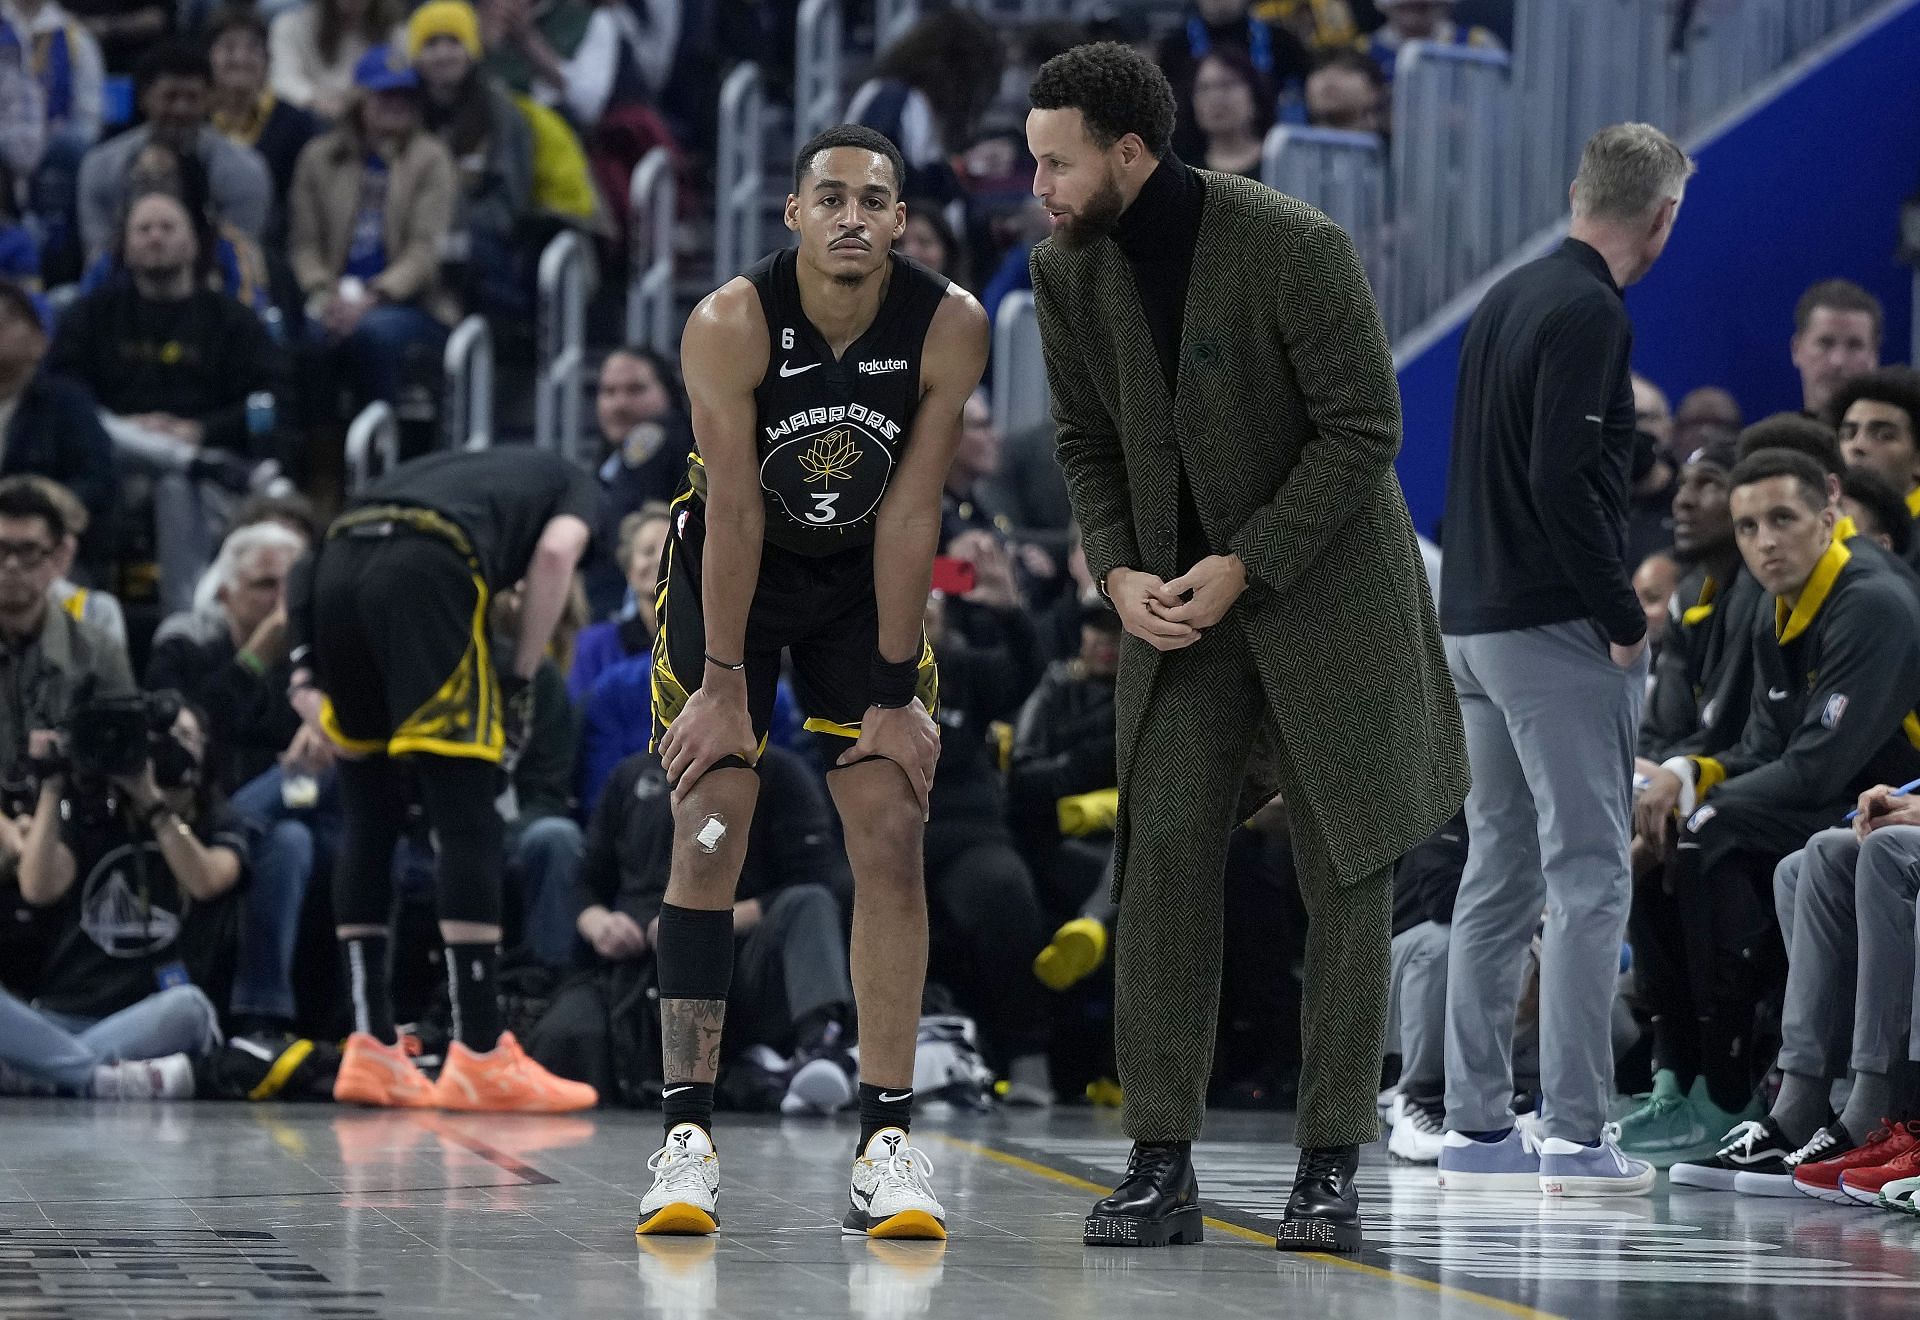 Jordan Poole (left) and Steph Curry of the Golden State Warriors